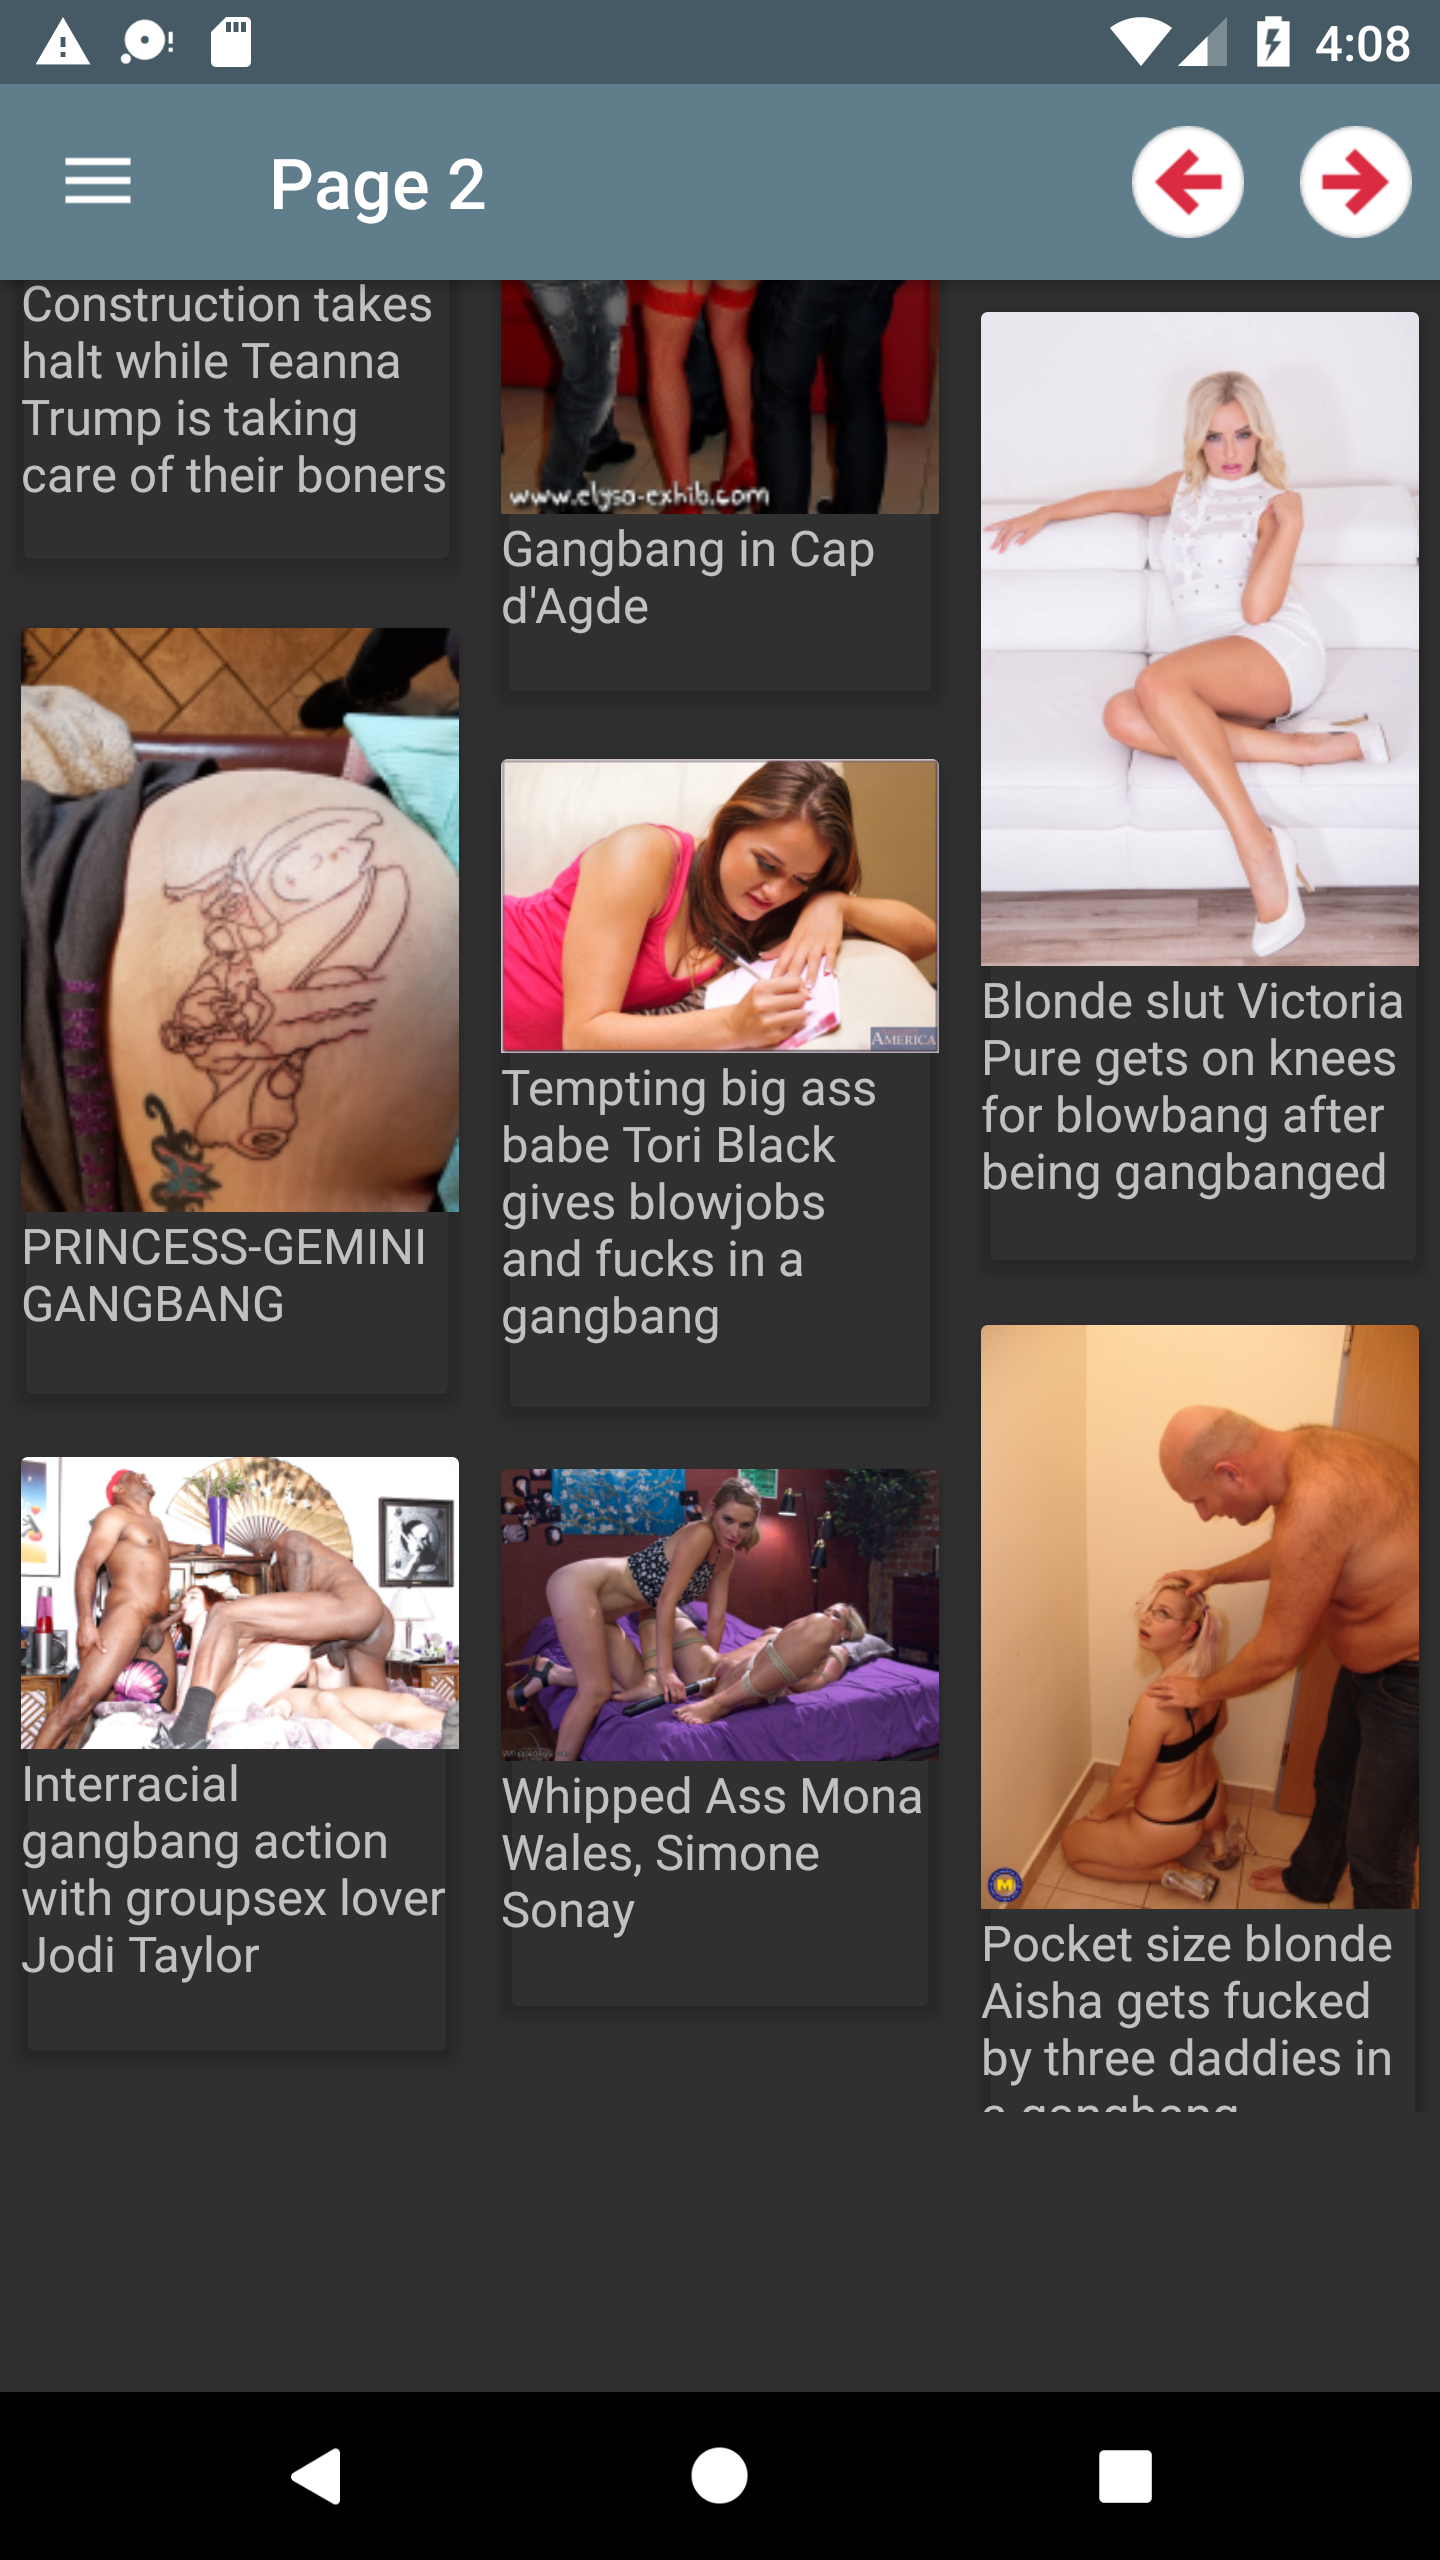 Gangbang Porn download,pornstars,collection,hentia,galleries,hot,picture,best,apk,adult,henati,pics,hentai,porn,apps,pron,perfectshemales,sexy,app,pictures,pic